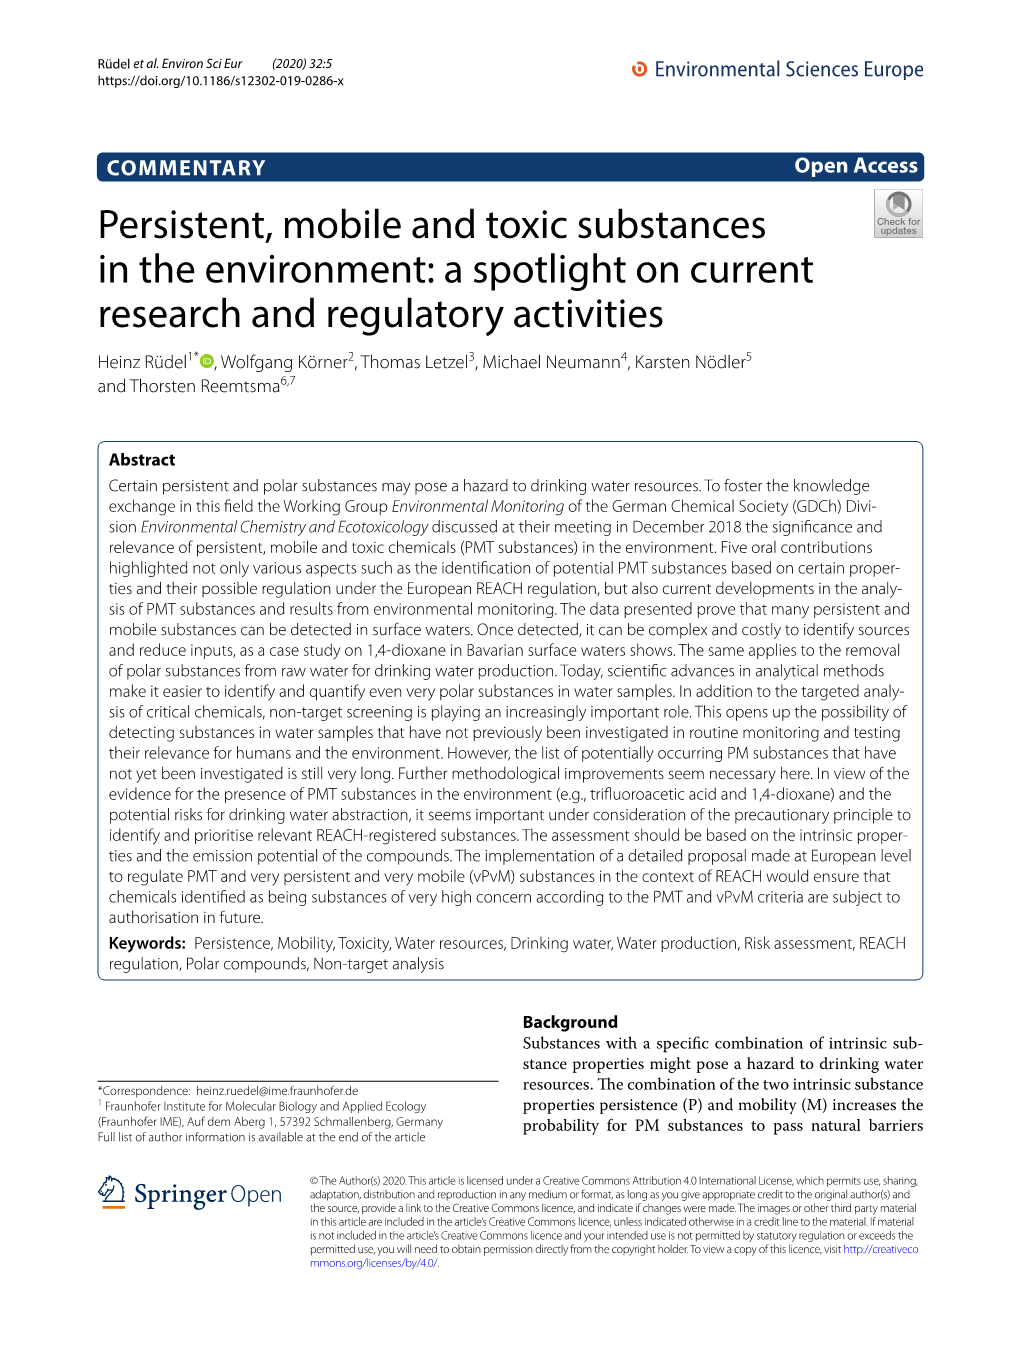 Persistent, Mobile and Toxic Substances in the Environment